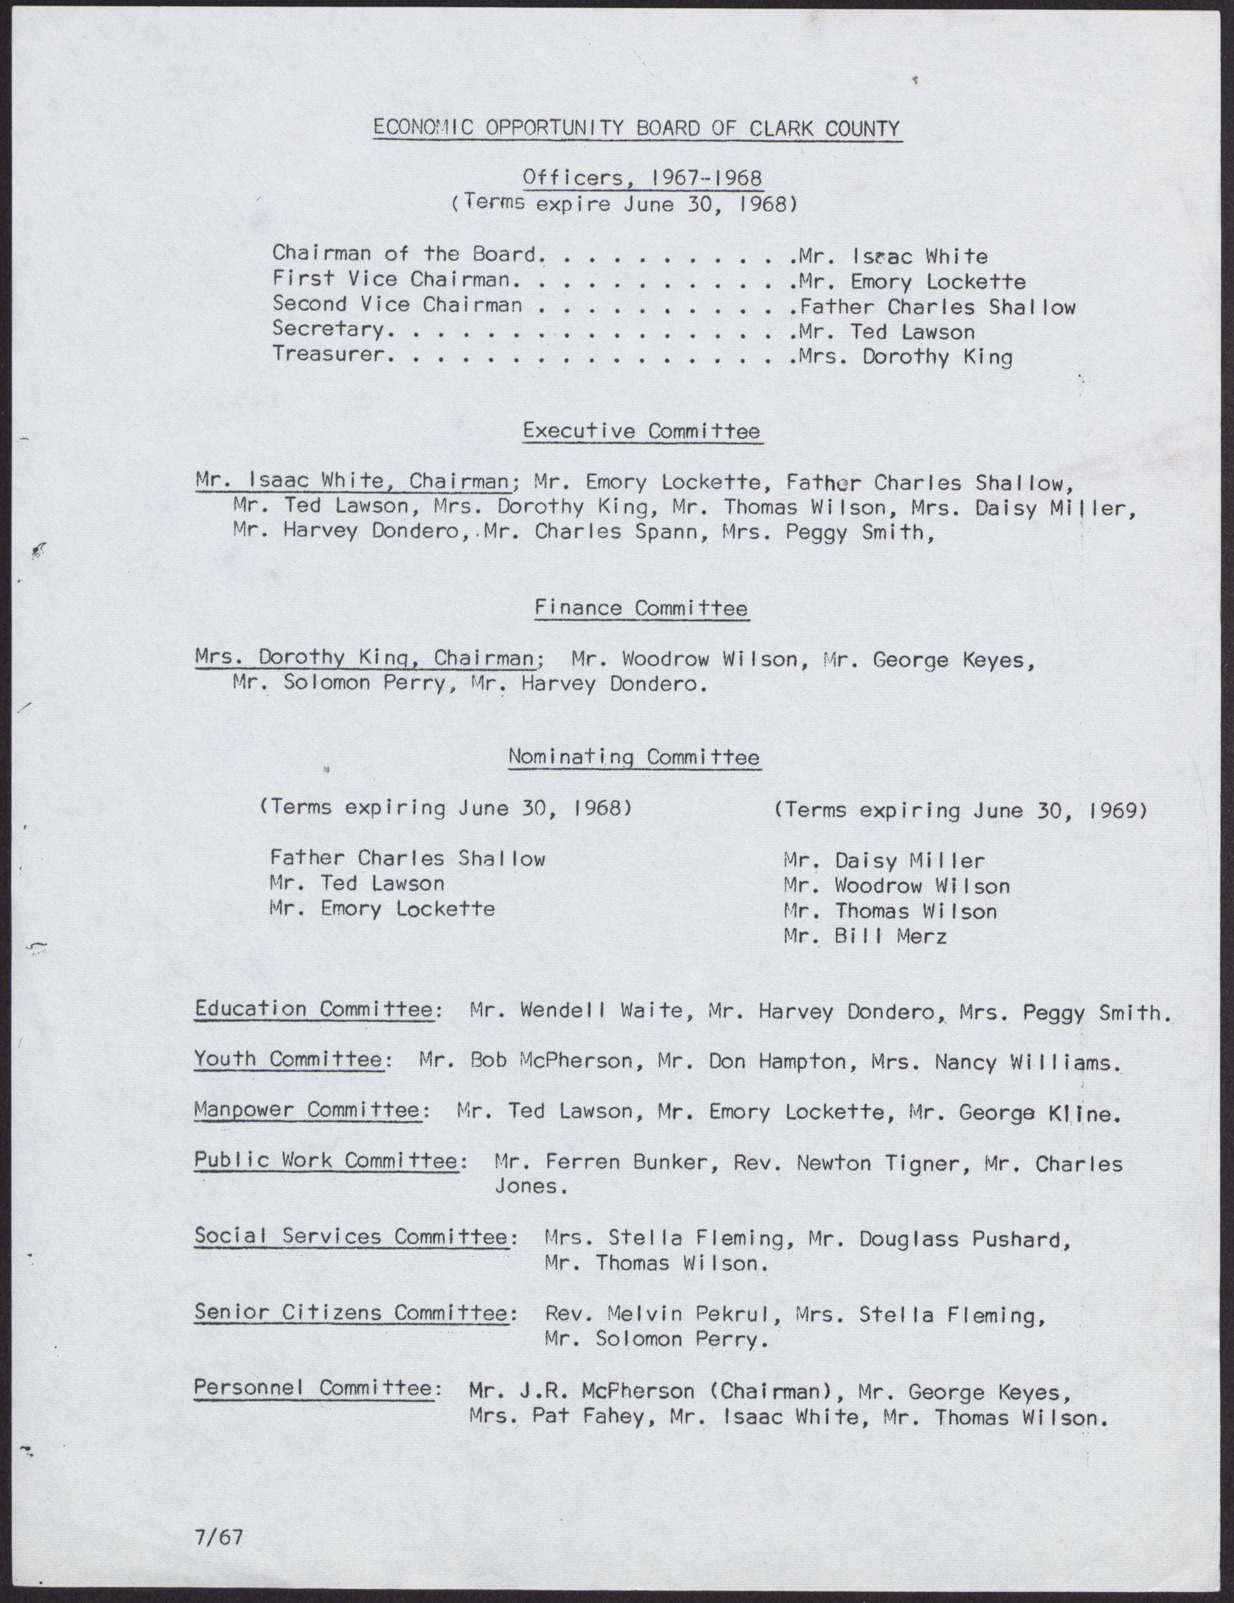 List of Economic Opportunity Board of Clark County Officers (2 pages), 1967-1968